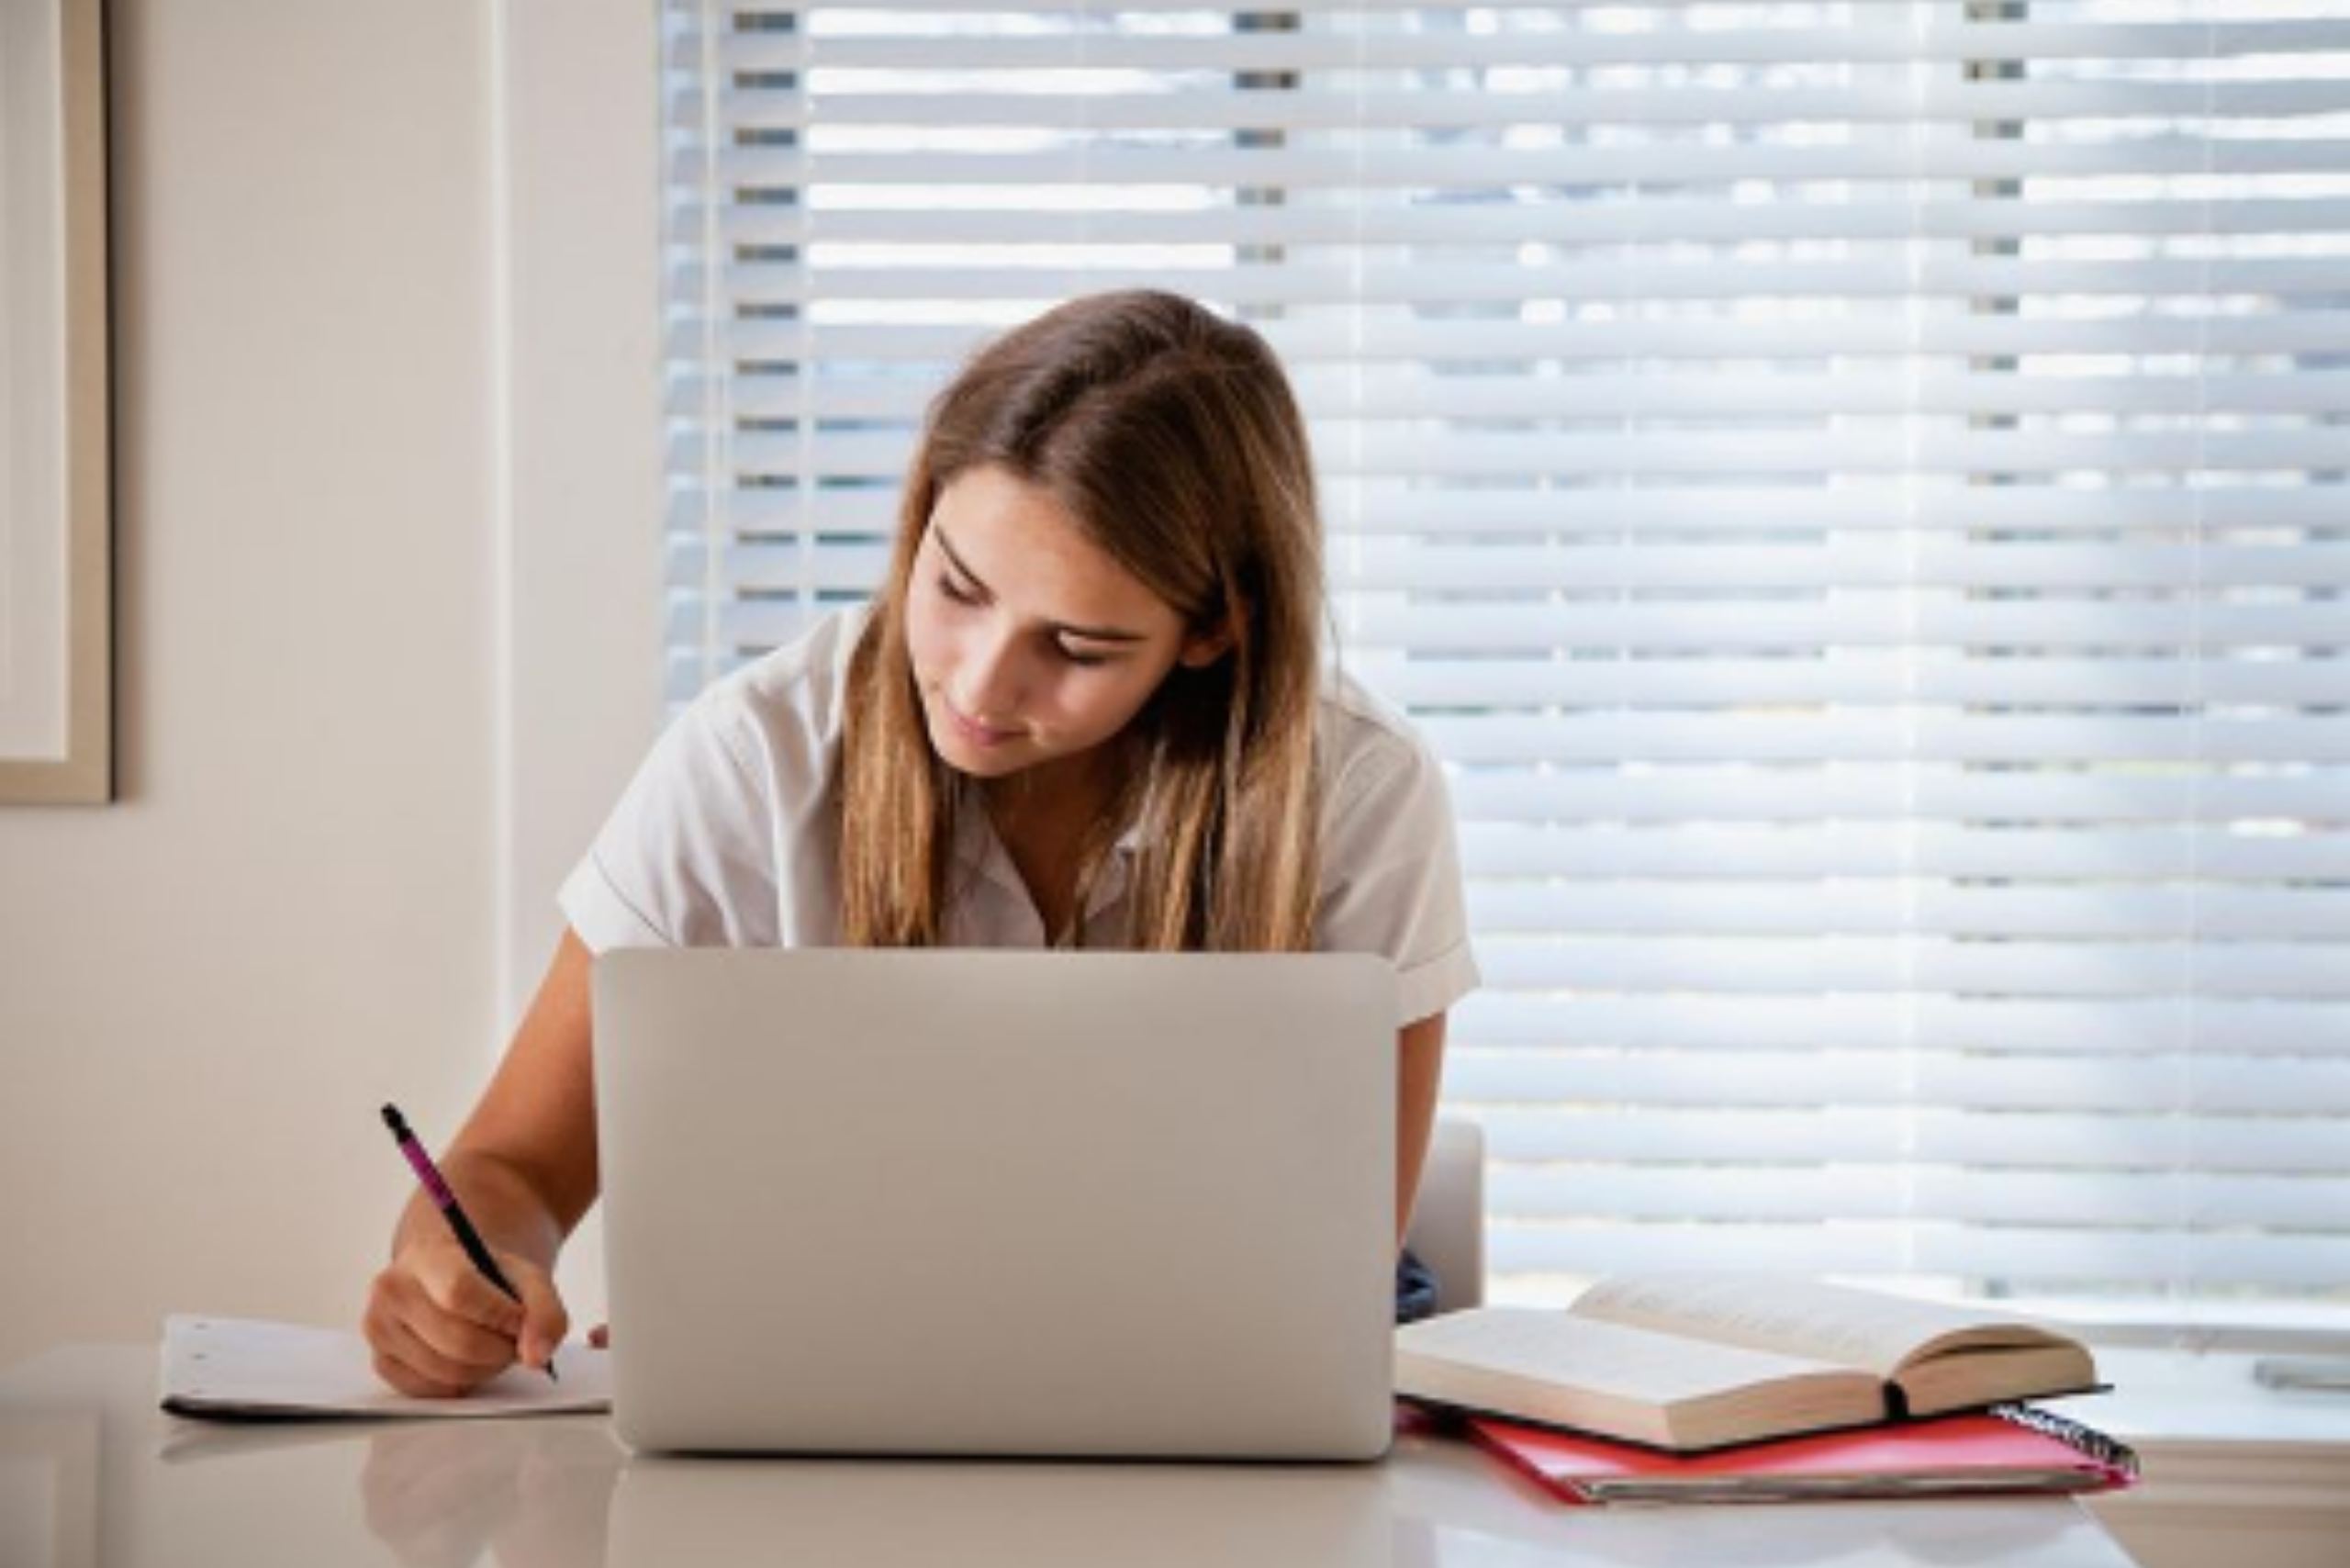 Student completing schoolwork at home